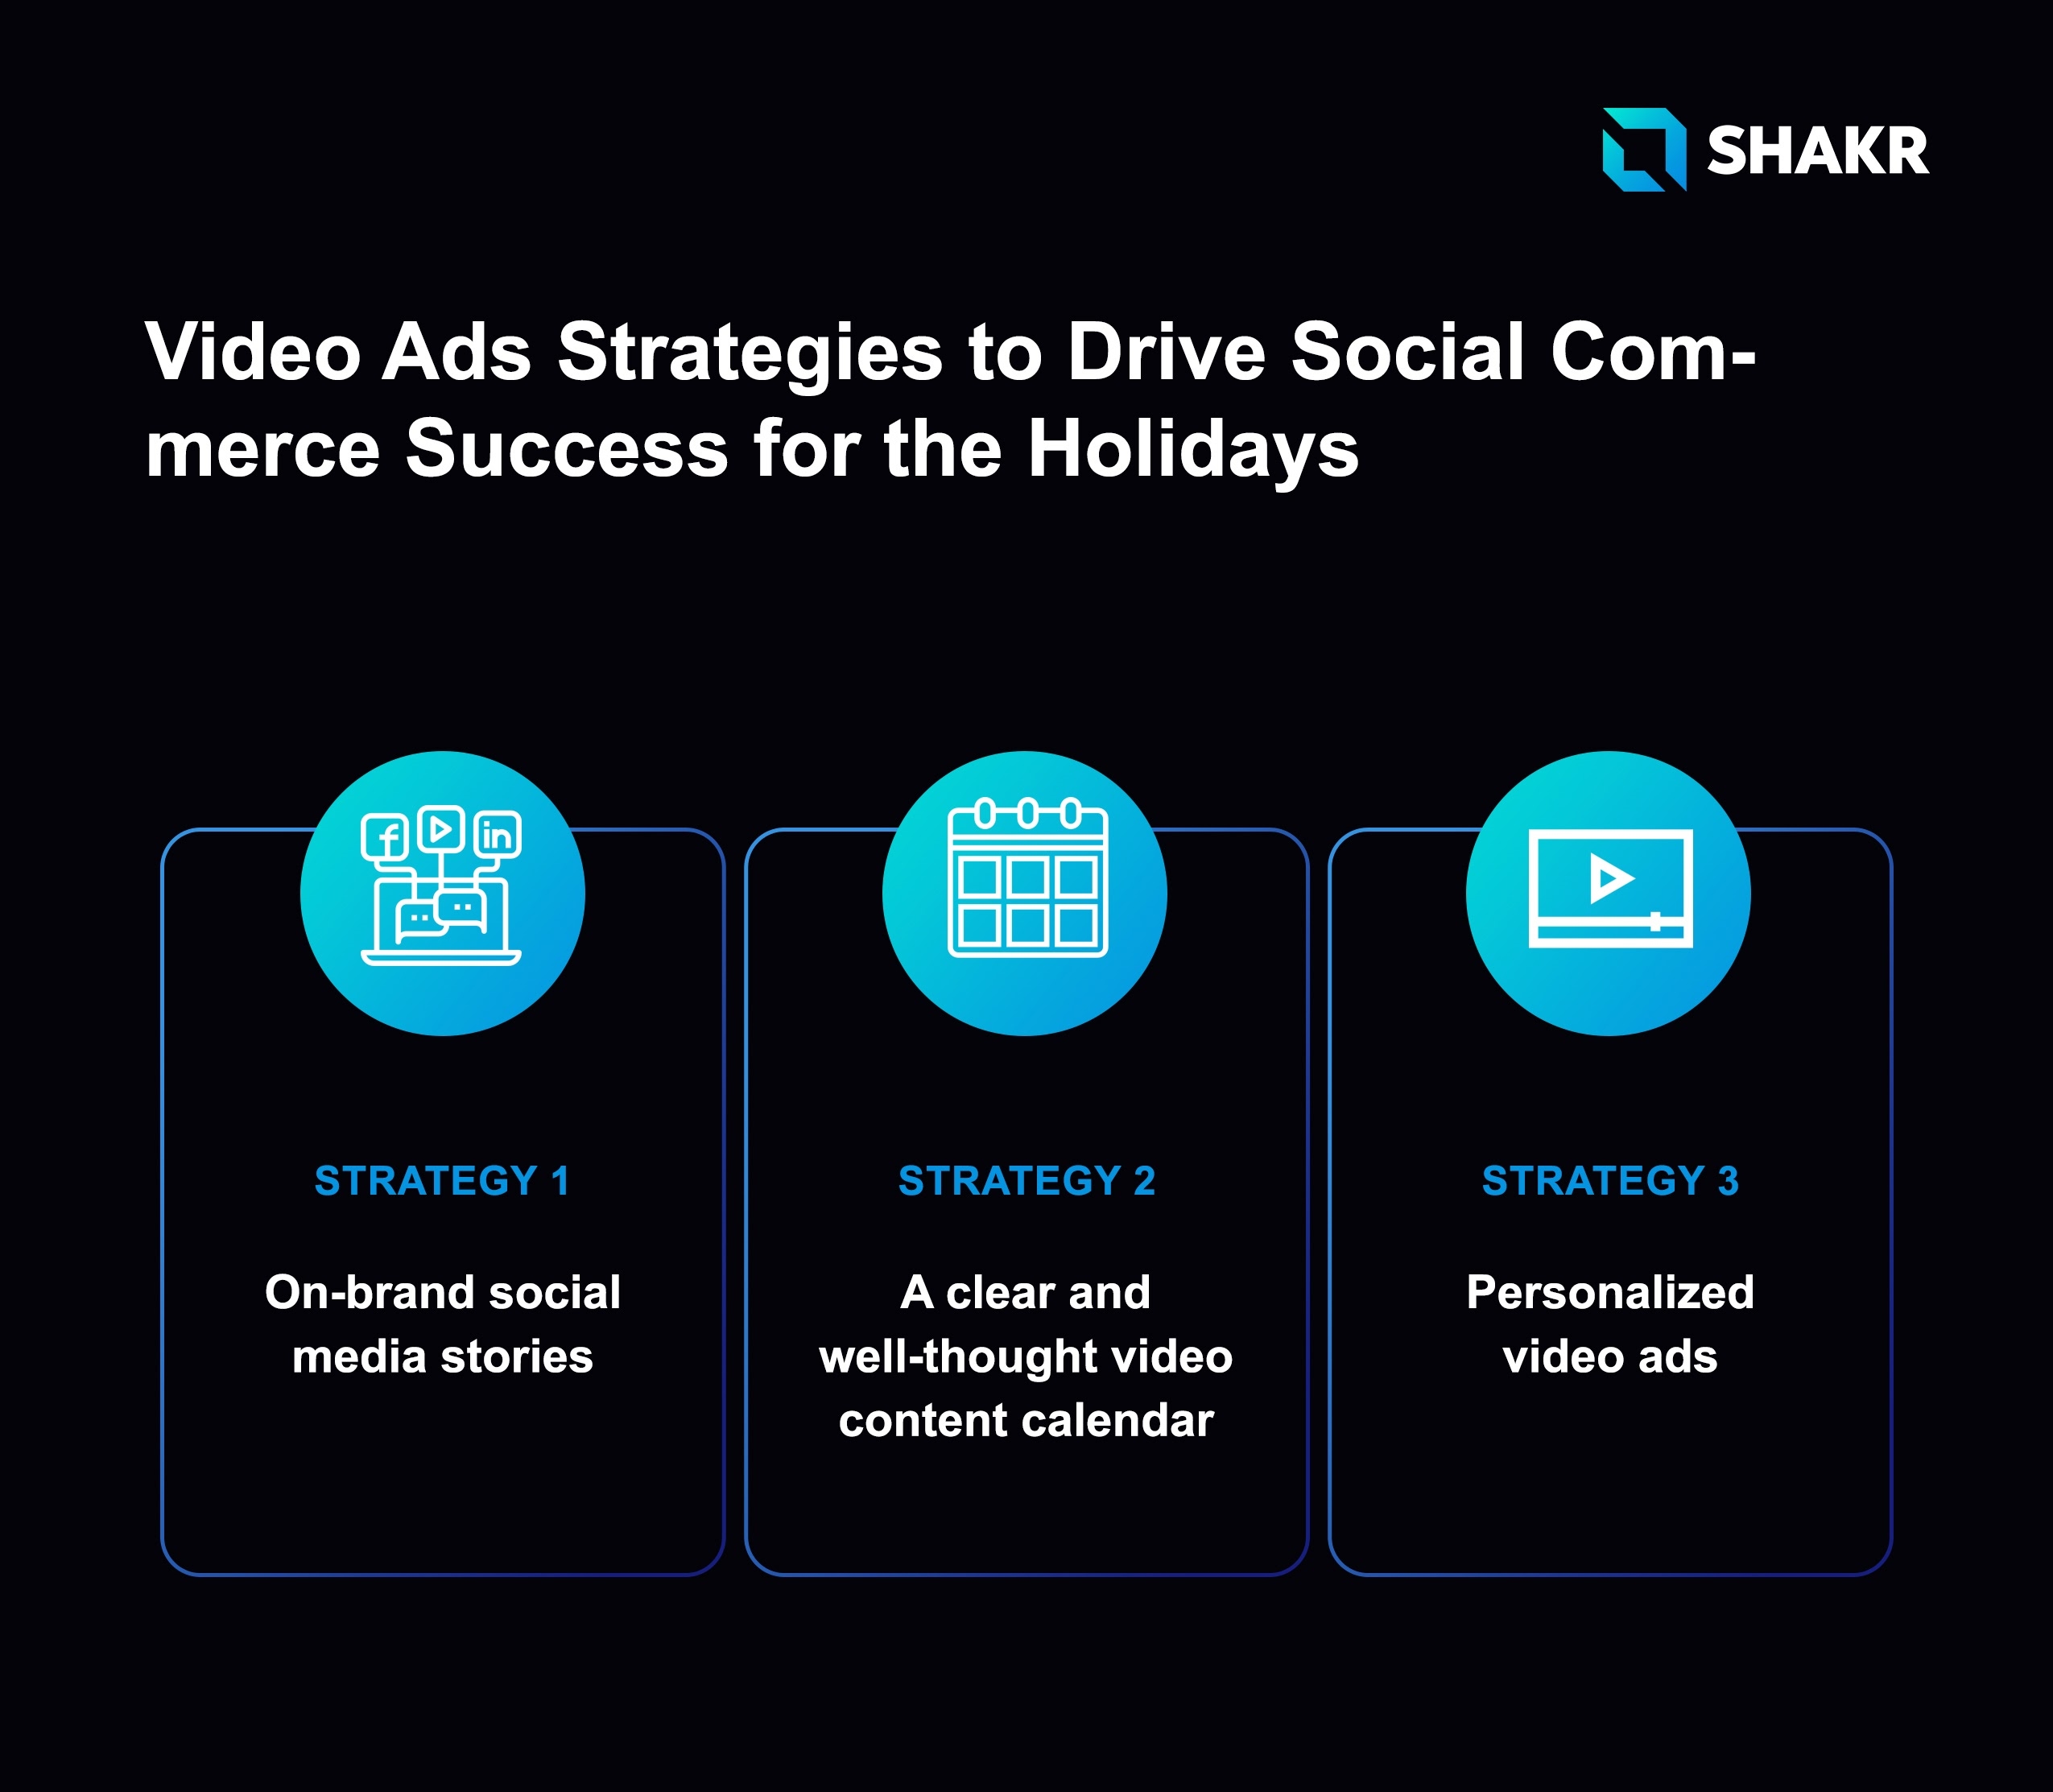 Social Commerce for the 2021 Holidays: How to Drive Growth with Video Ads